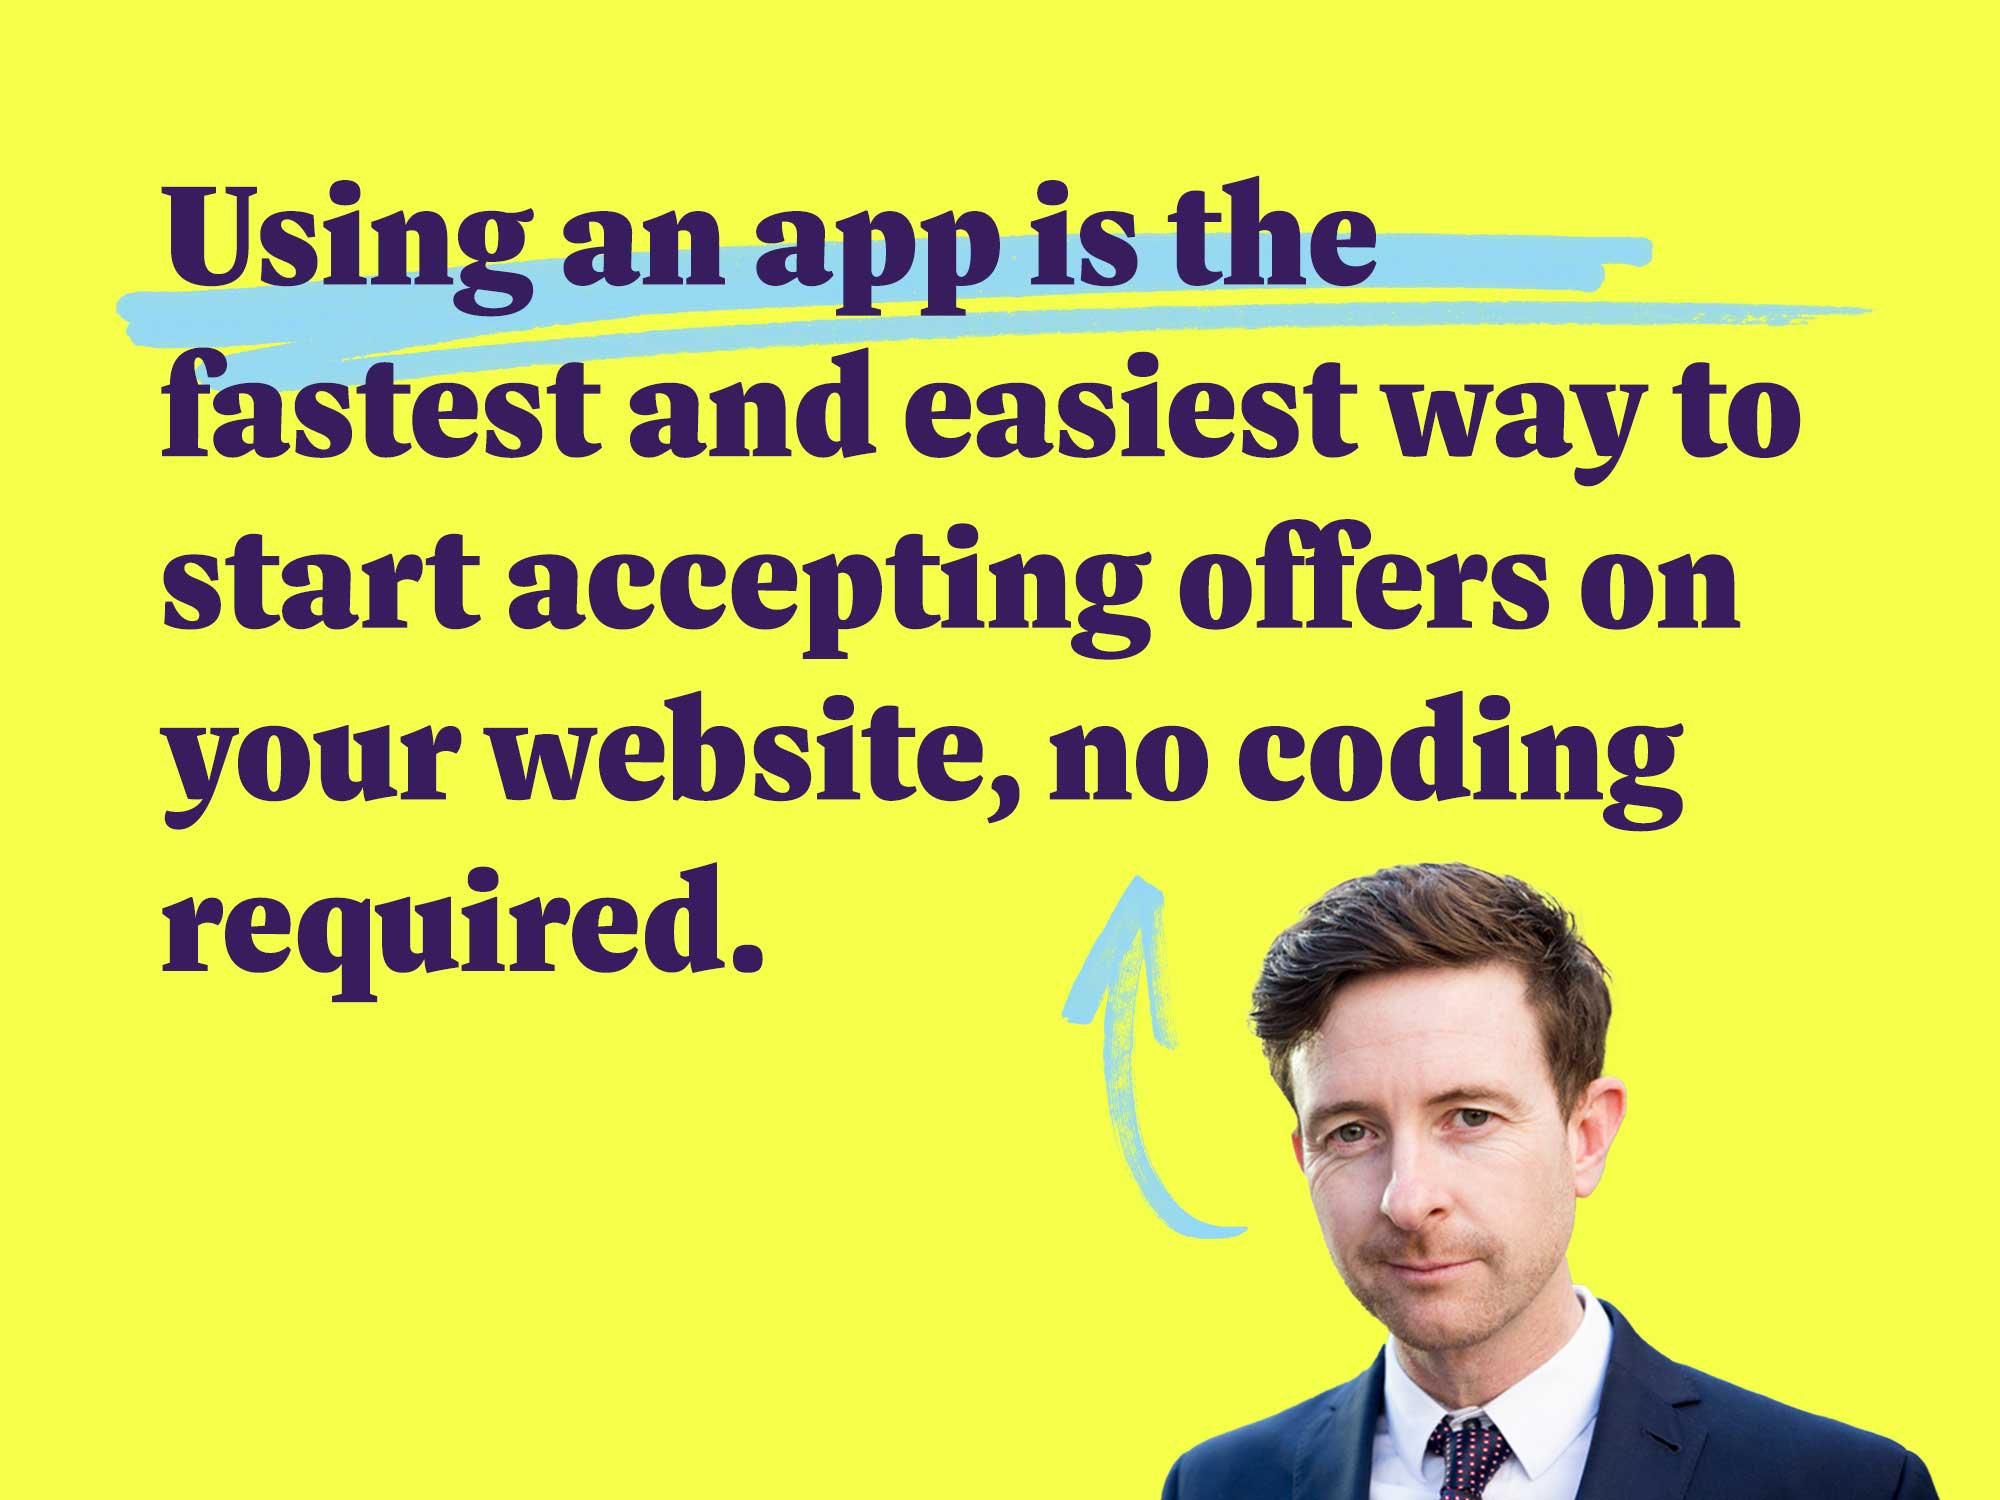 Using an app is the fastest and easiest way to start accepting offers on your website, no coding required.